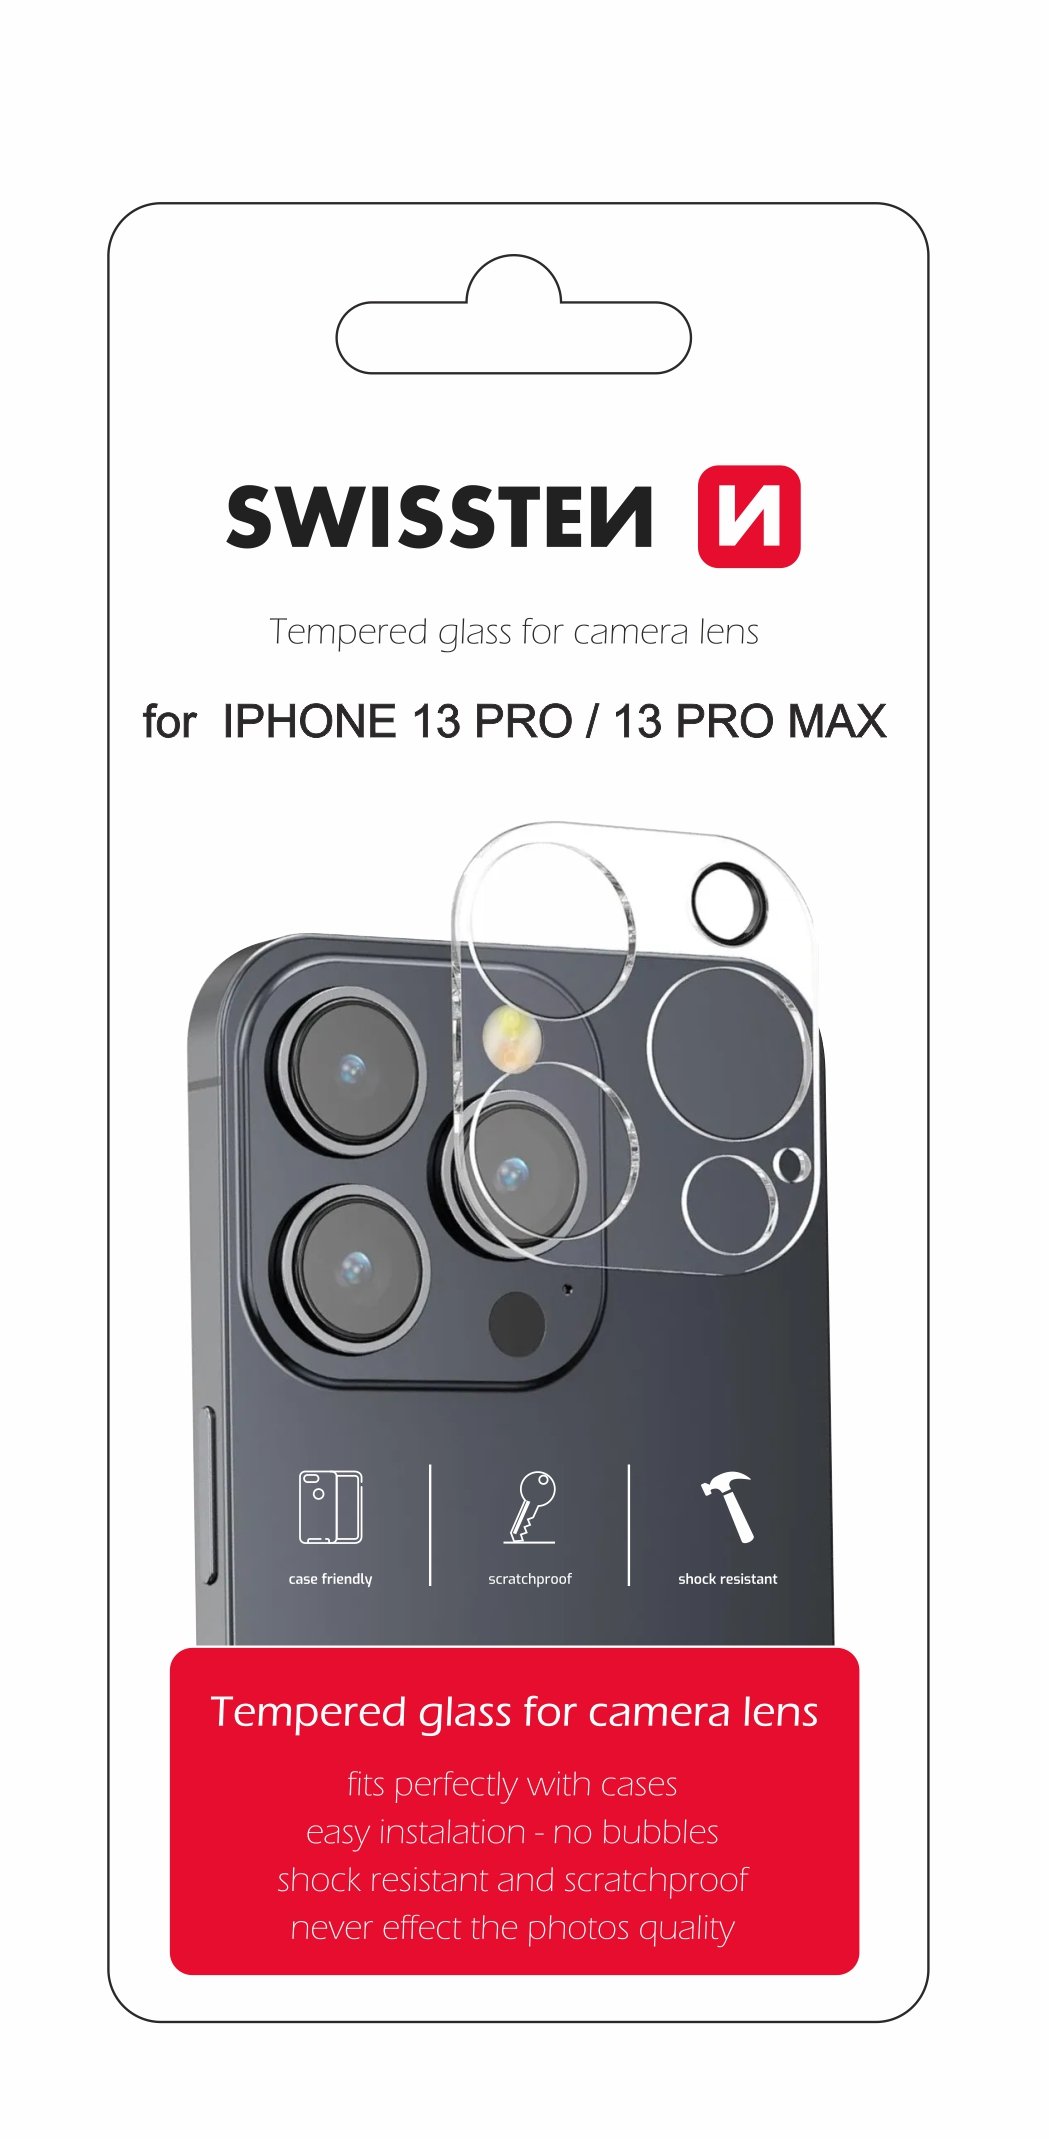 Swissten Tempered Glass For Camera Lens For Apple iPhone 13 Pro / 13 Pro Max